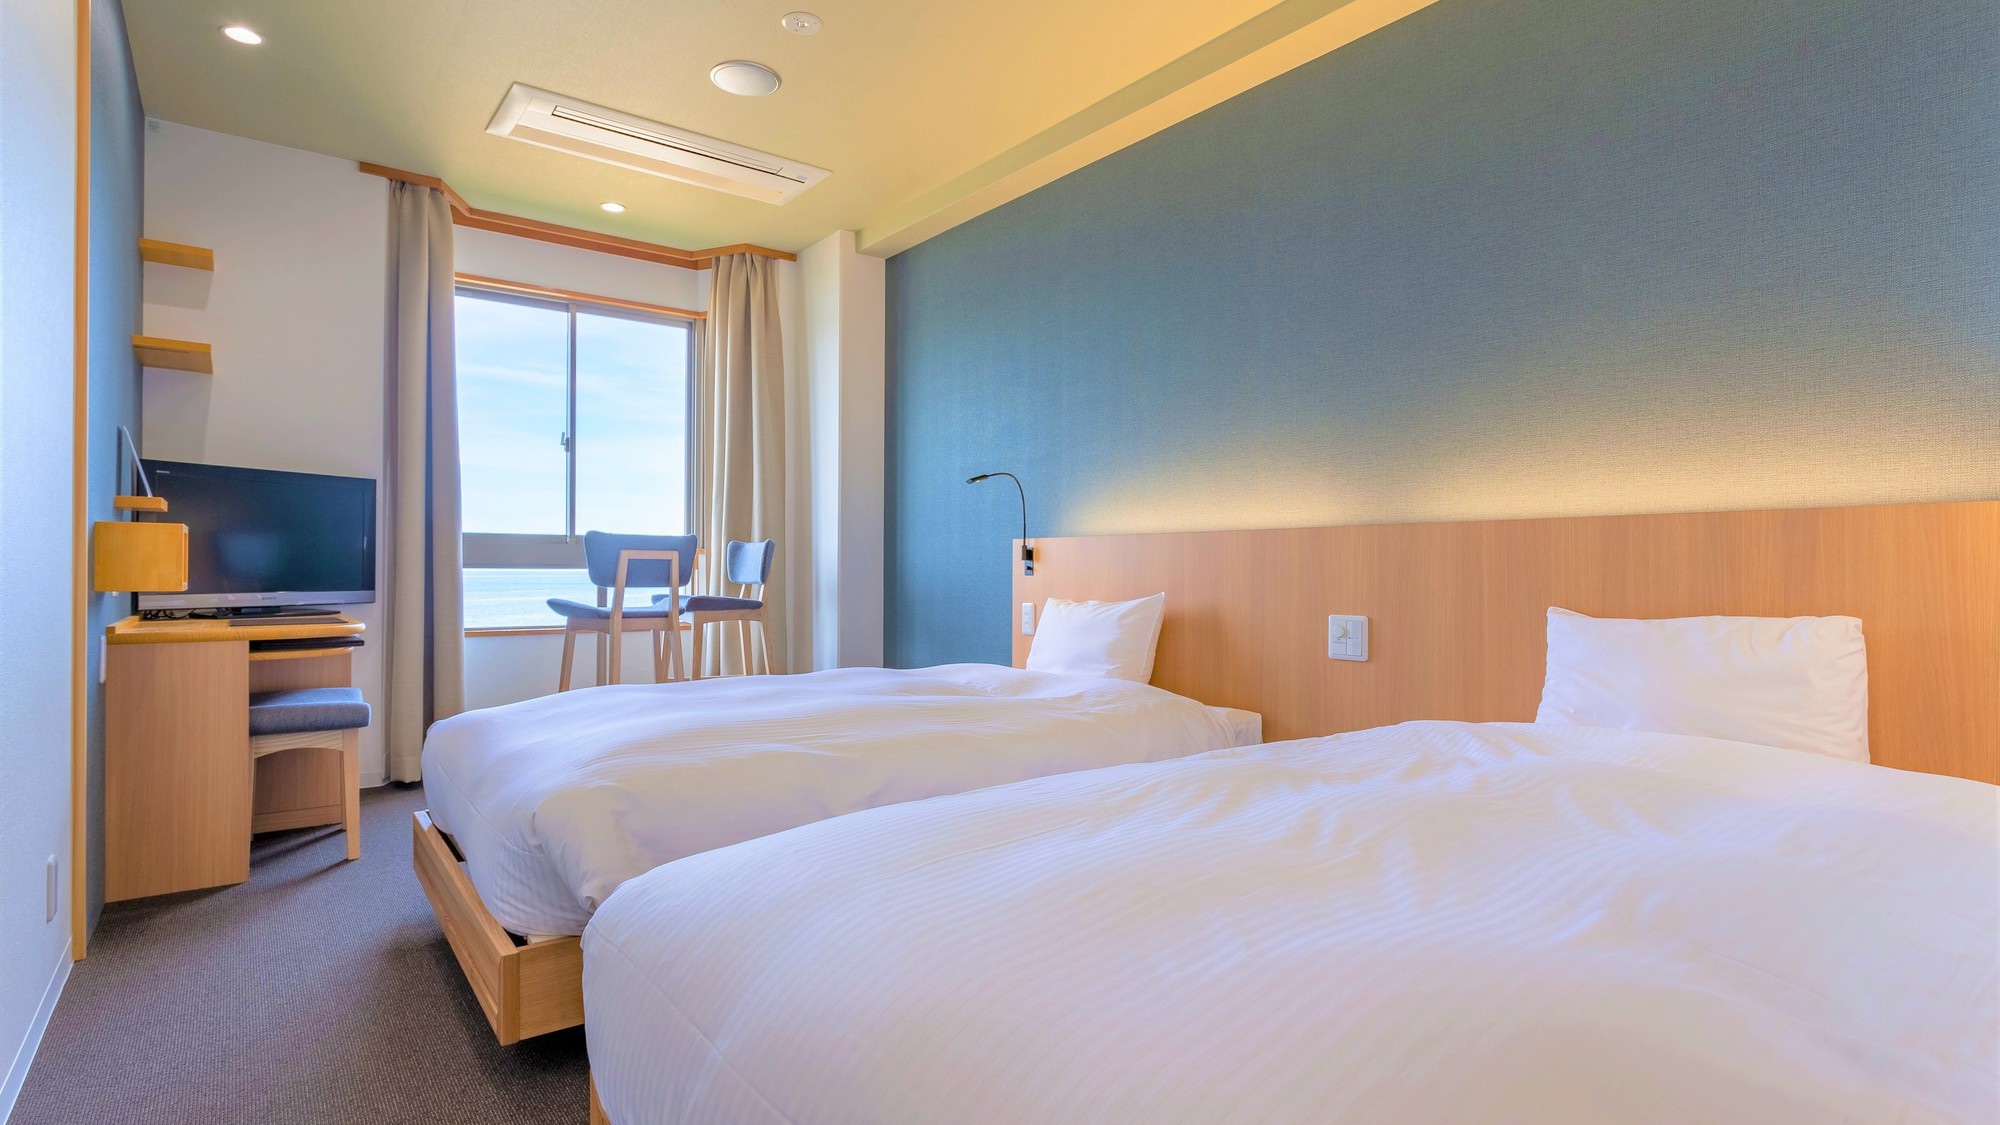 ■ Renewal Twin 20 sqm / No smoking in the entire building / Oceanfront (2nd and 3rd floors)